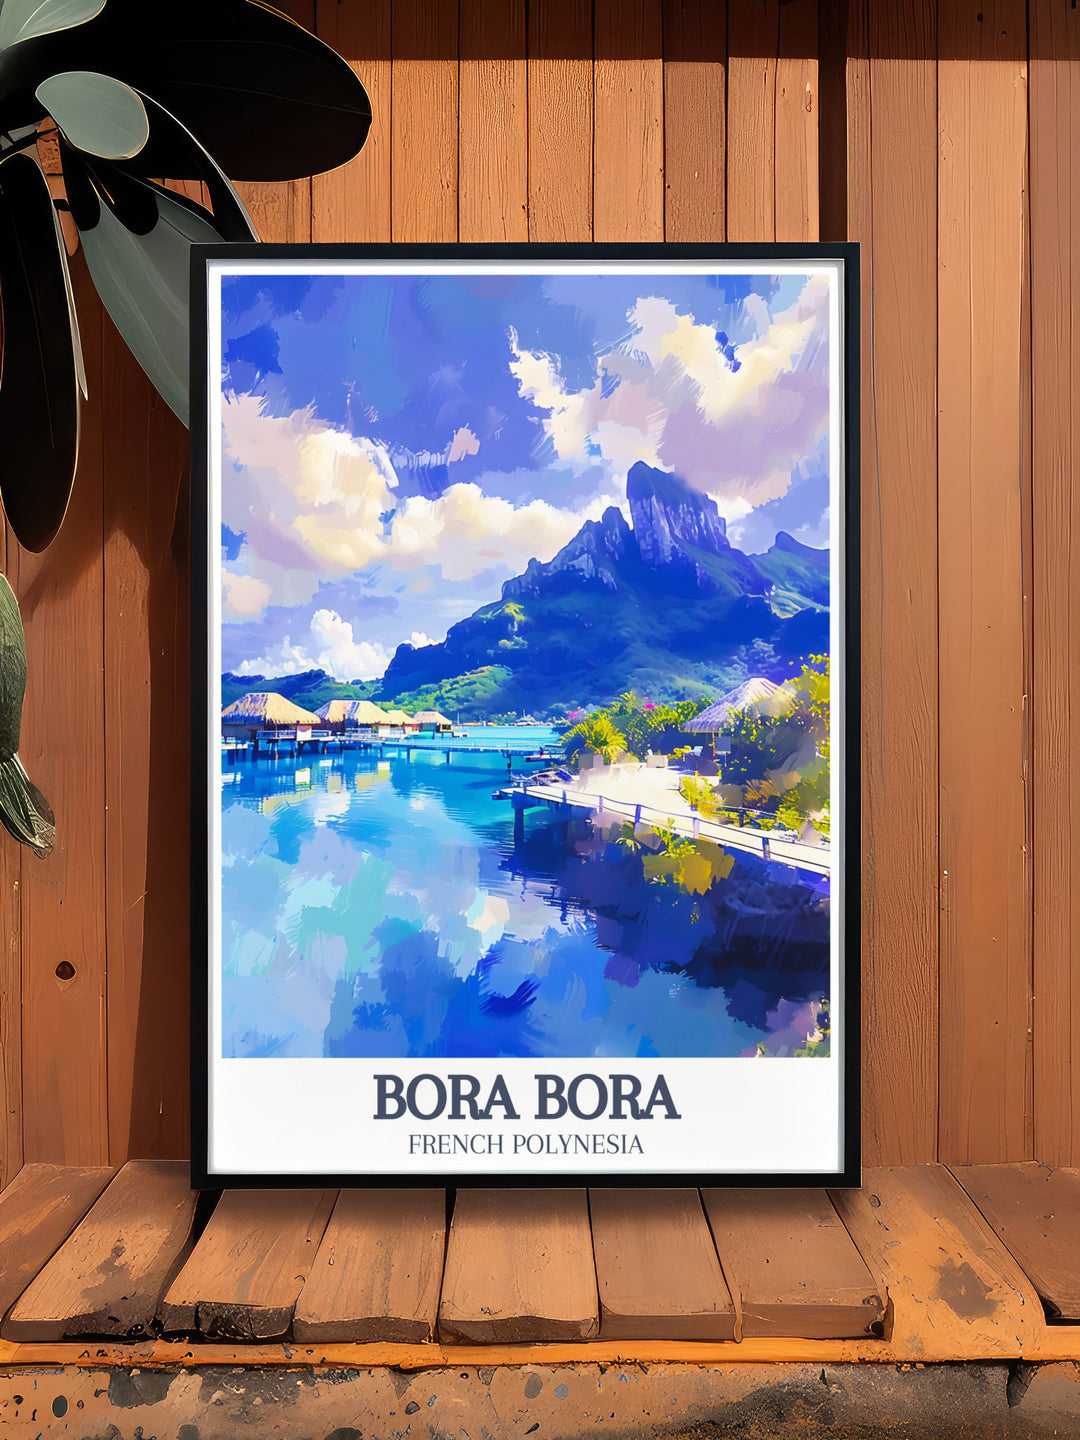 Captivating Bora Bora wall art featuring Mount Otemanu Matira Beach this travel print is perfect for those who love stunning landscapes and want to bring the serene beauty of French Polynesia into their home ideal for enhancing any room with elegance and tranquility.